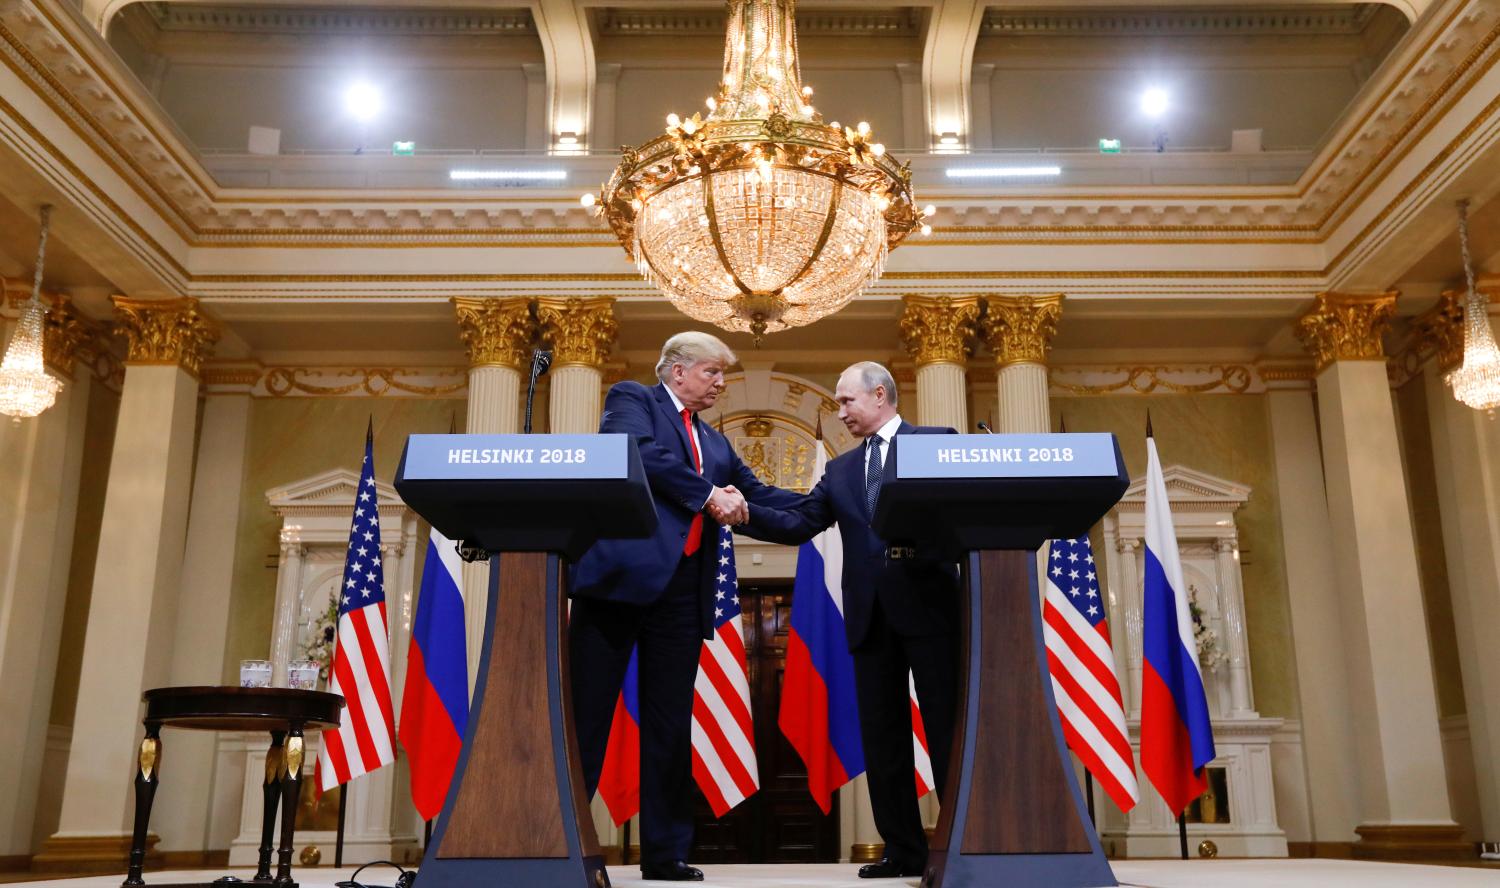 U.S. President Donald Trump and Russia's President Vladimir Putin shake hands during a joint news conference after their meeting in Helsinki, Finland, July 16, 2018. REUTERS/Kevin Lamarque - RC165B49D900